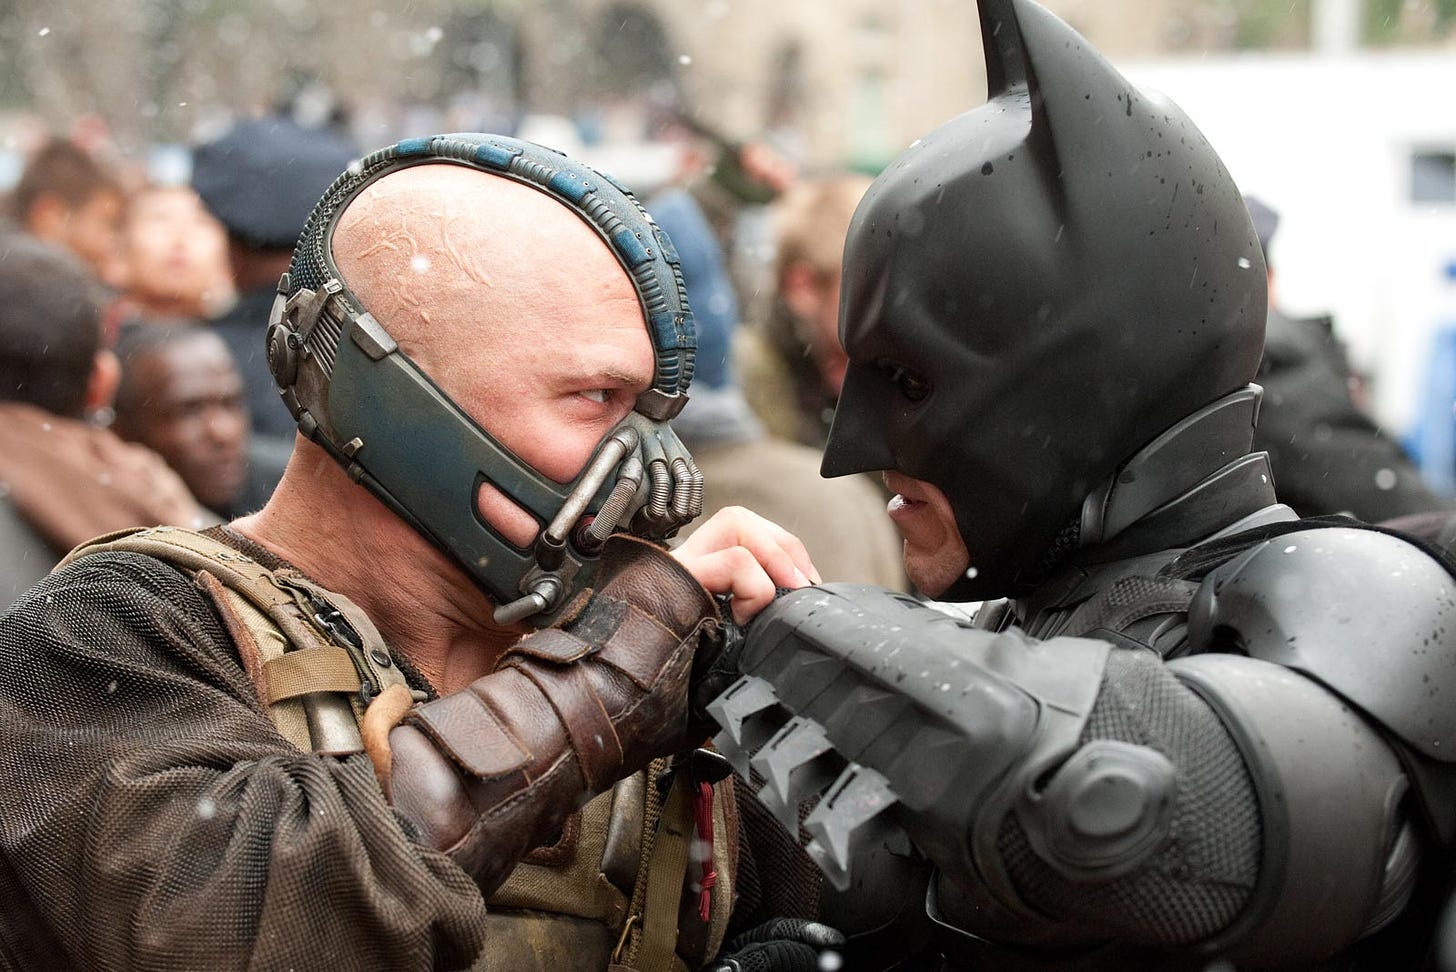 10 Things Parents Should Know About The Dark Knight Rises (Spoiler-Free) |  WIRED